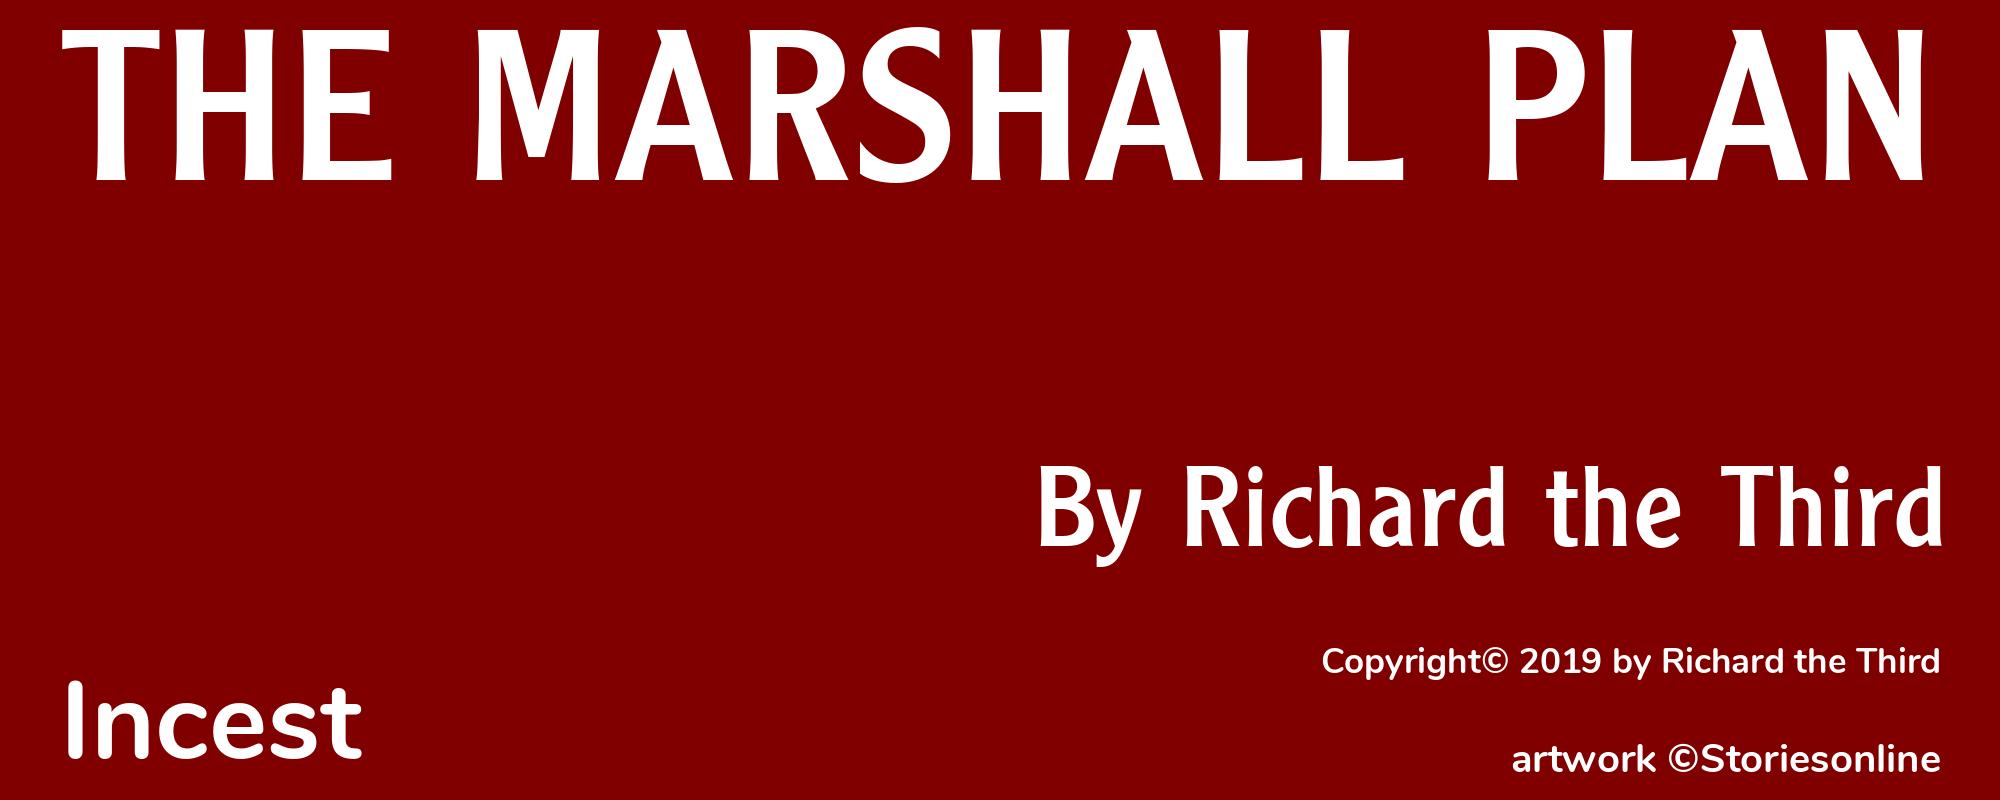 THE MARSHALL PLAN - Cover